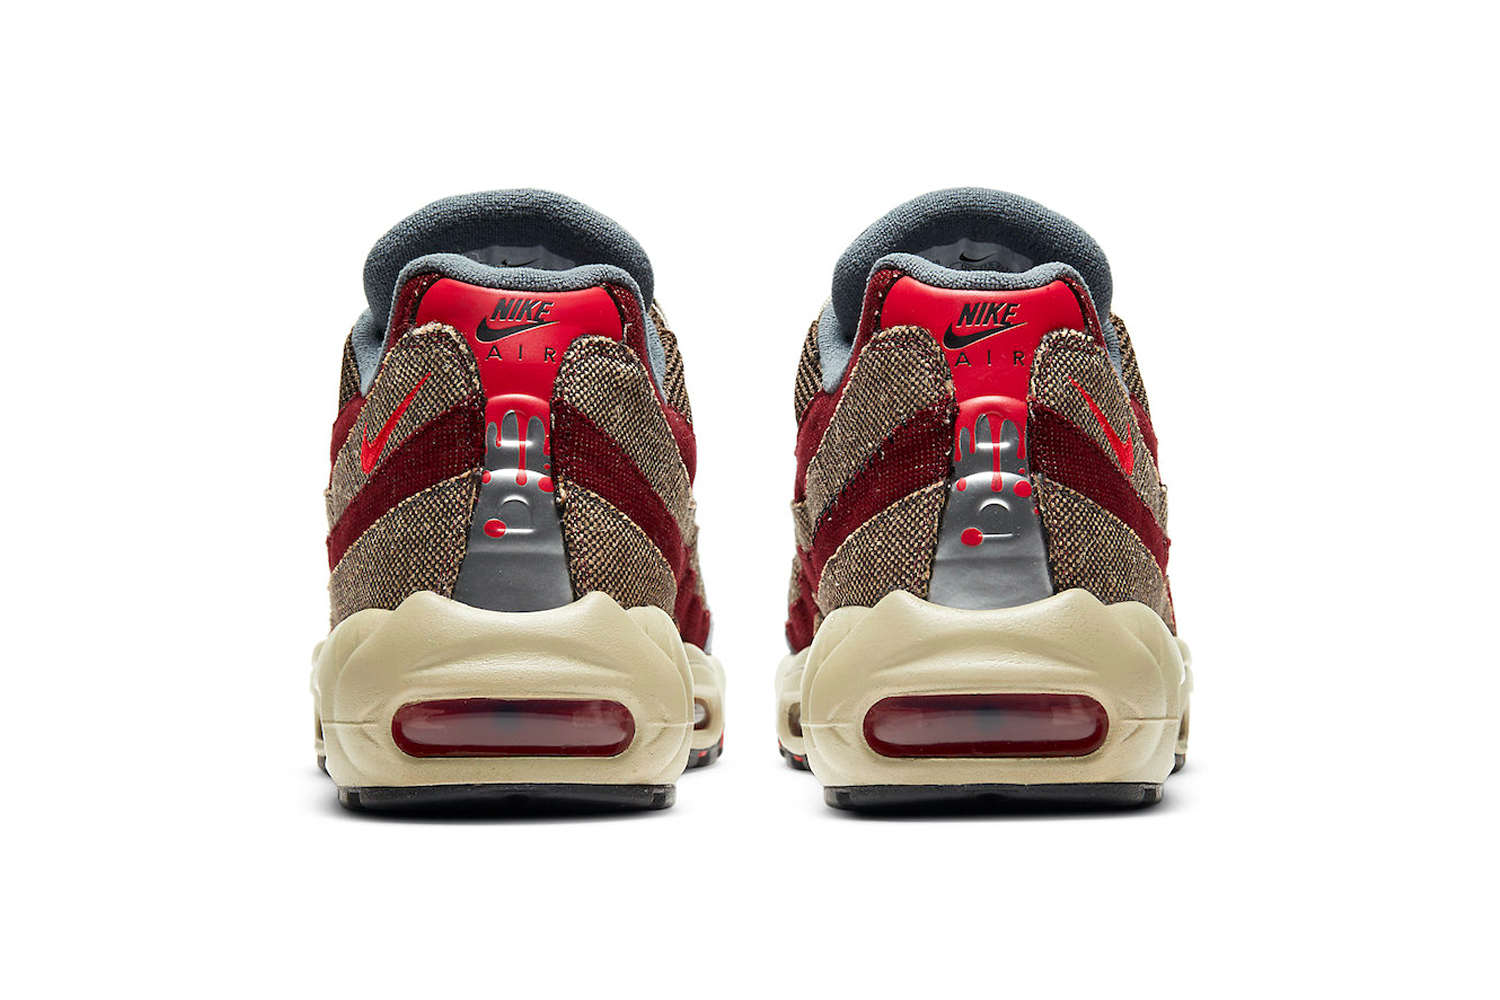 Falange aguacero cuenco These Nike Freddy Krueger Air Max 95s Are Scarily Good - GQ Middle East